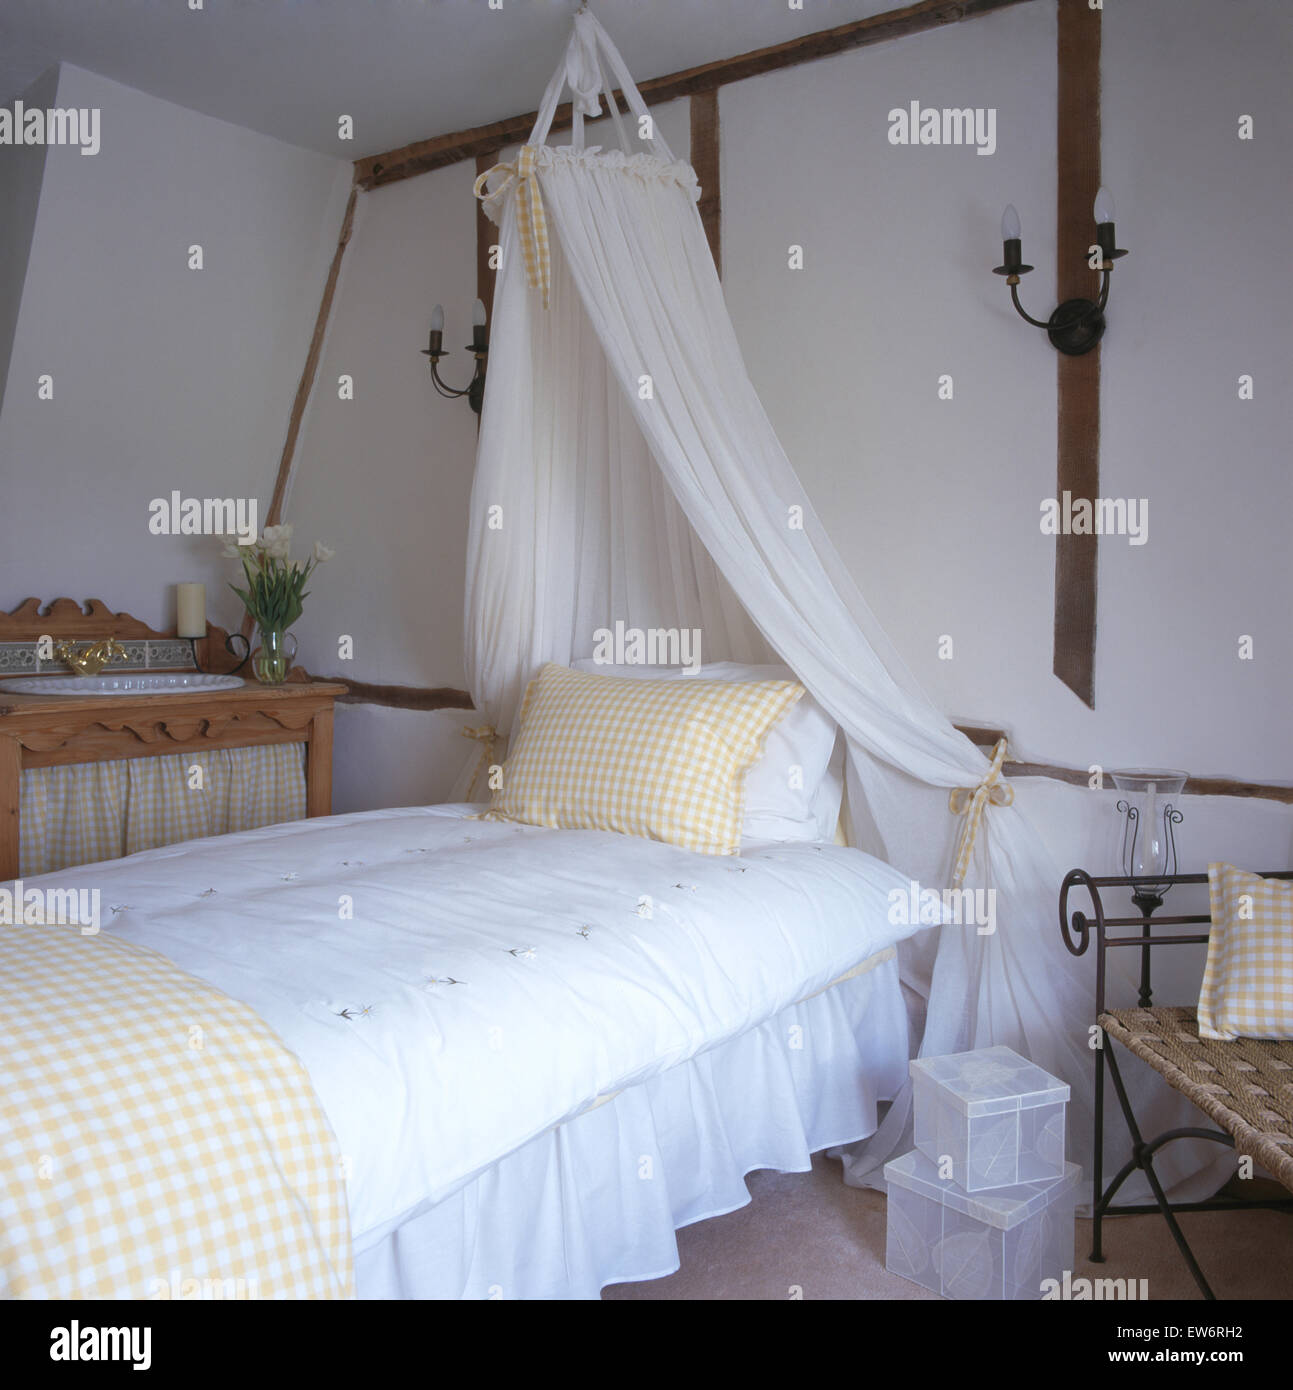 Coronet with white voile drapes above bed with white duvet in nineties cottage bedroom Stock Photo